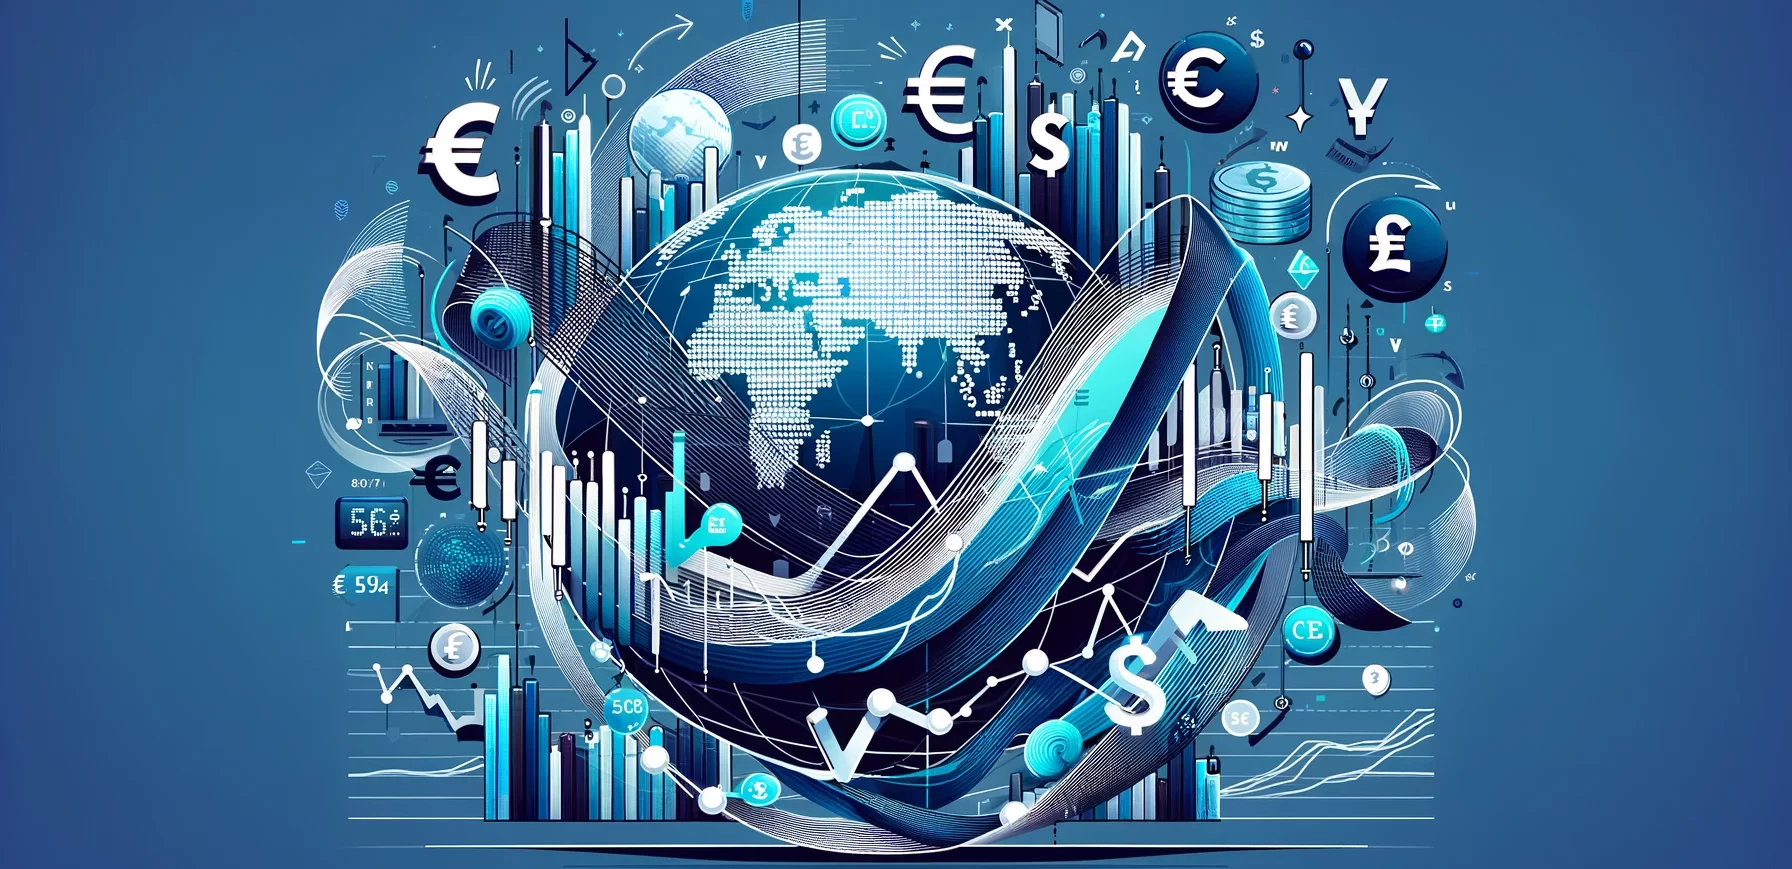 A Quick Guide to the Forex Market